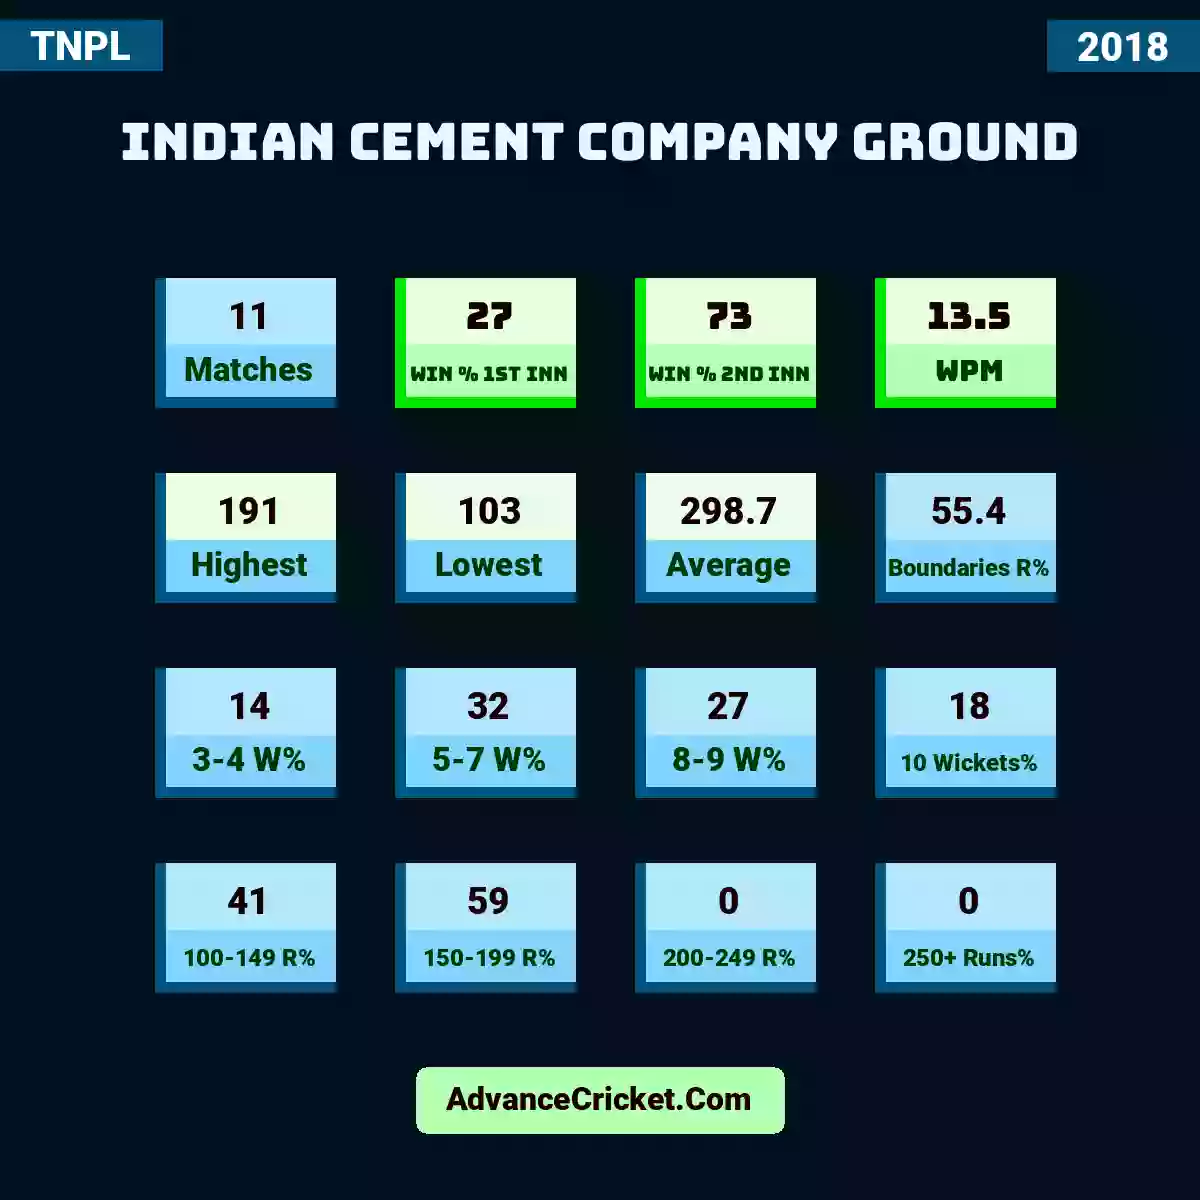 Image showing Indian Cement Company Ground with Matches: 11, Win % 1st Inn: 27, Win % 2nd Inn: 73, WPM: 13.5, Highest: 191, Lowest: 103, Average: 298.7, Boundaries R%: 55.4, 3-4 W%: 14, 5-7 W%: 32, 8-9 W%: 27, 10 Wickets%: 18, 100-149 R%: 41, 150-199 R%: 59, 200-249 R%: 0, 250+ Runs%: 0.